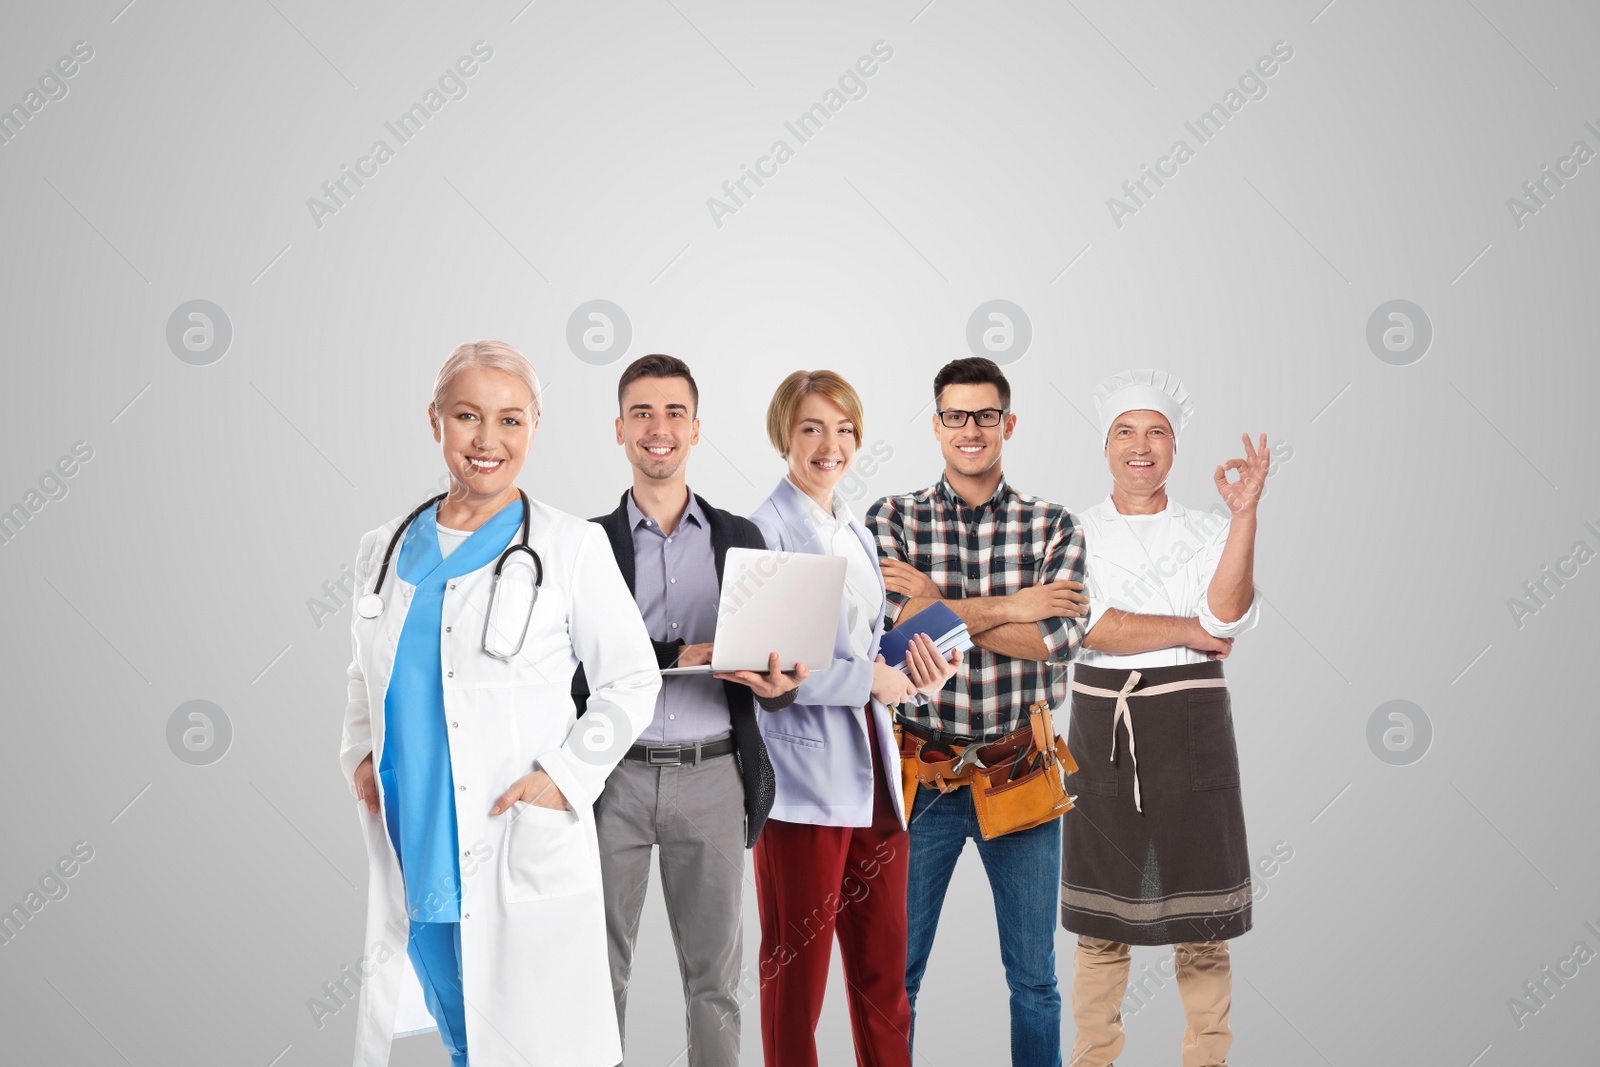 Image of Choosing profession. People of different occupations on light background